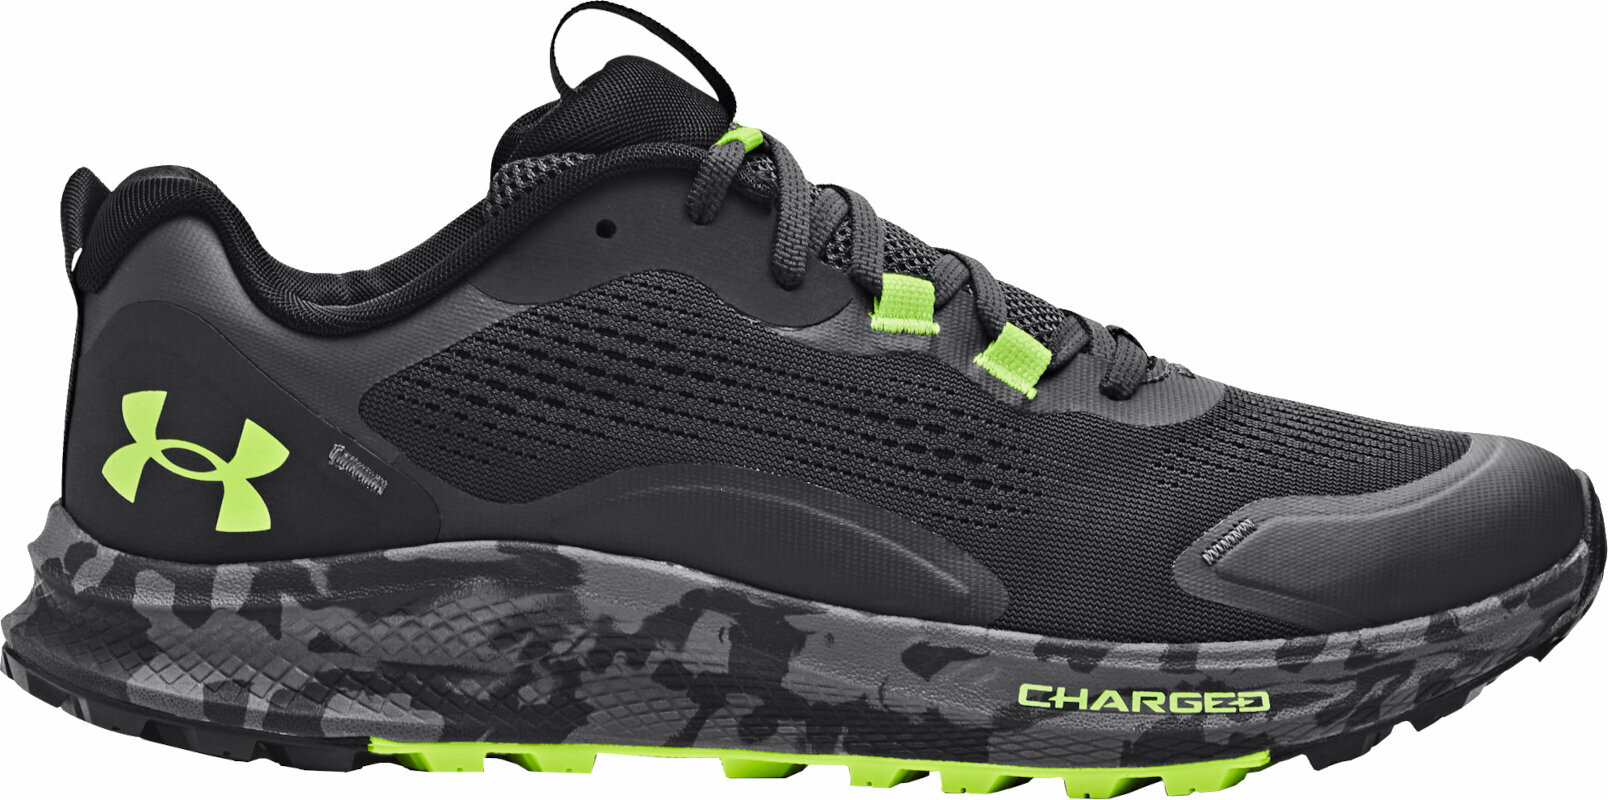 Under Armour Men's UA Charged Bandit Trail 2 Running Shoes Jet Gray/Black/Lime Surge 43